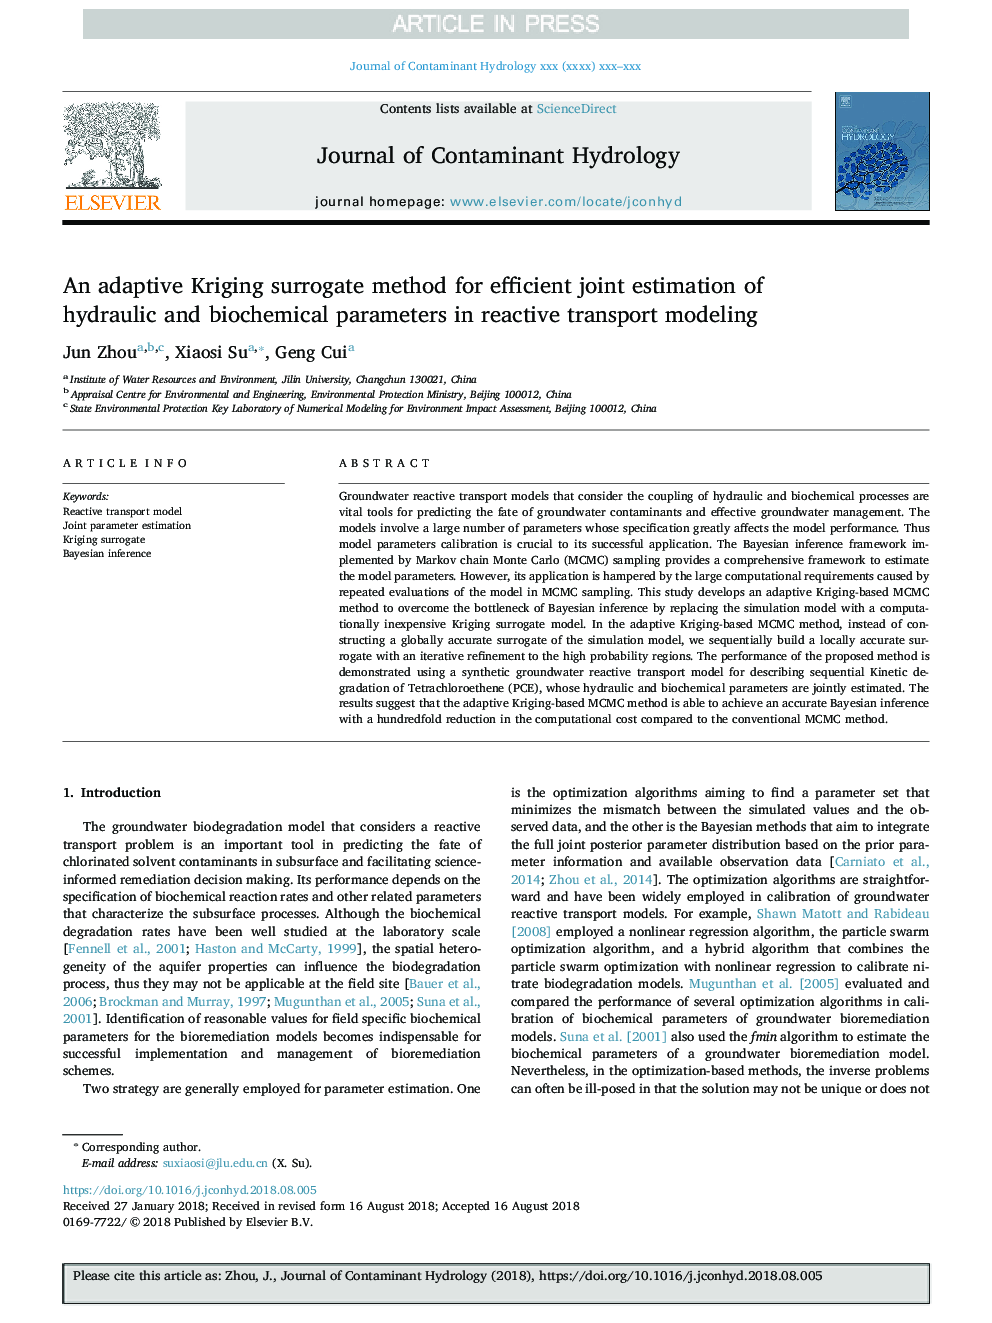 An adaptive Kriging surrogate method for efficient joint estimation of hydraulic and biochemical parameters in reactive transport modeling